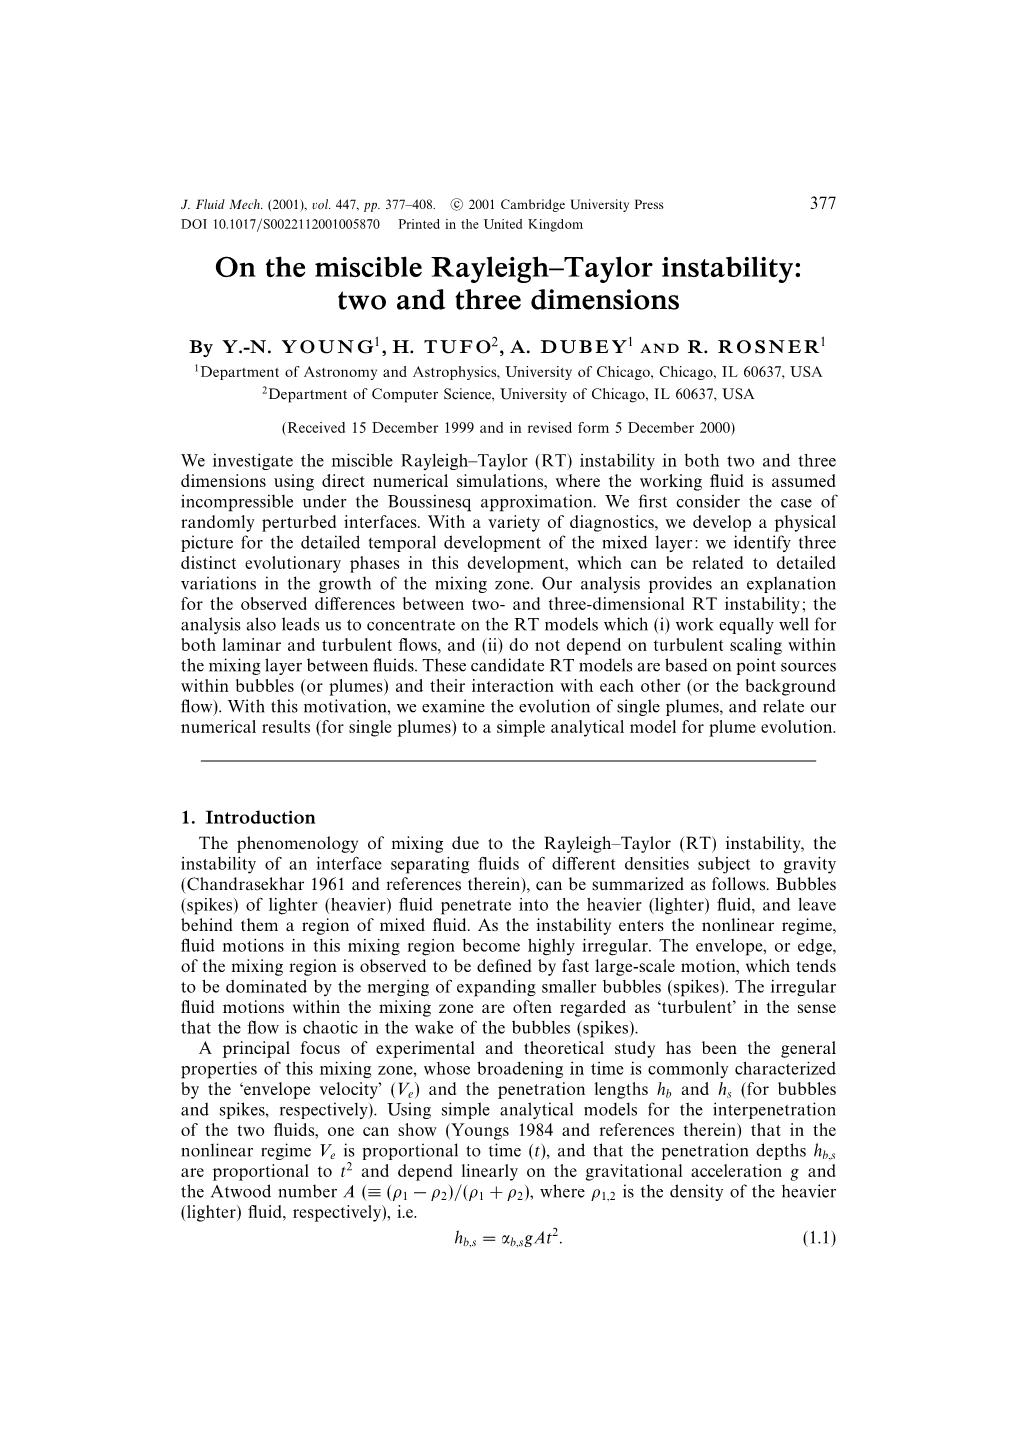 On the Miscible Rayleigh–Taylor Instability: Two and Three Dimensions